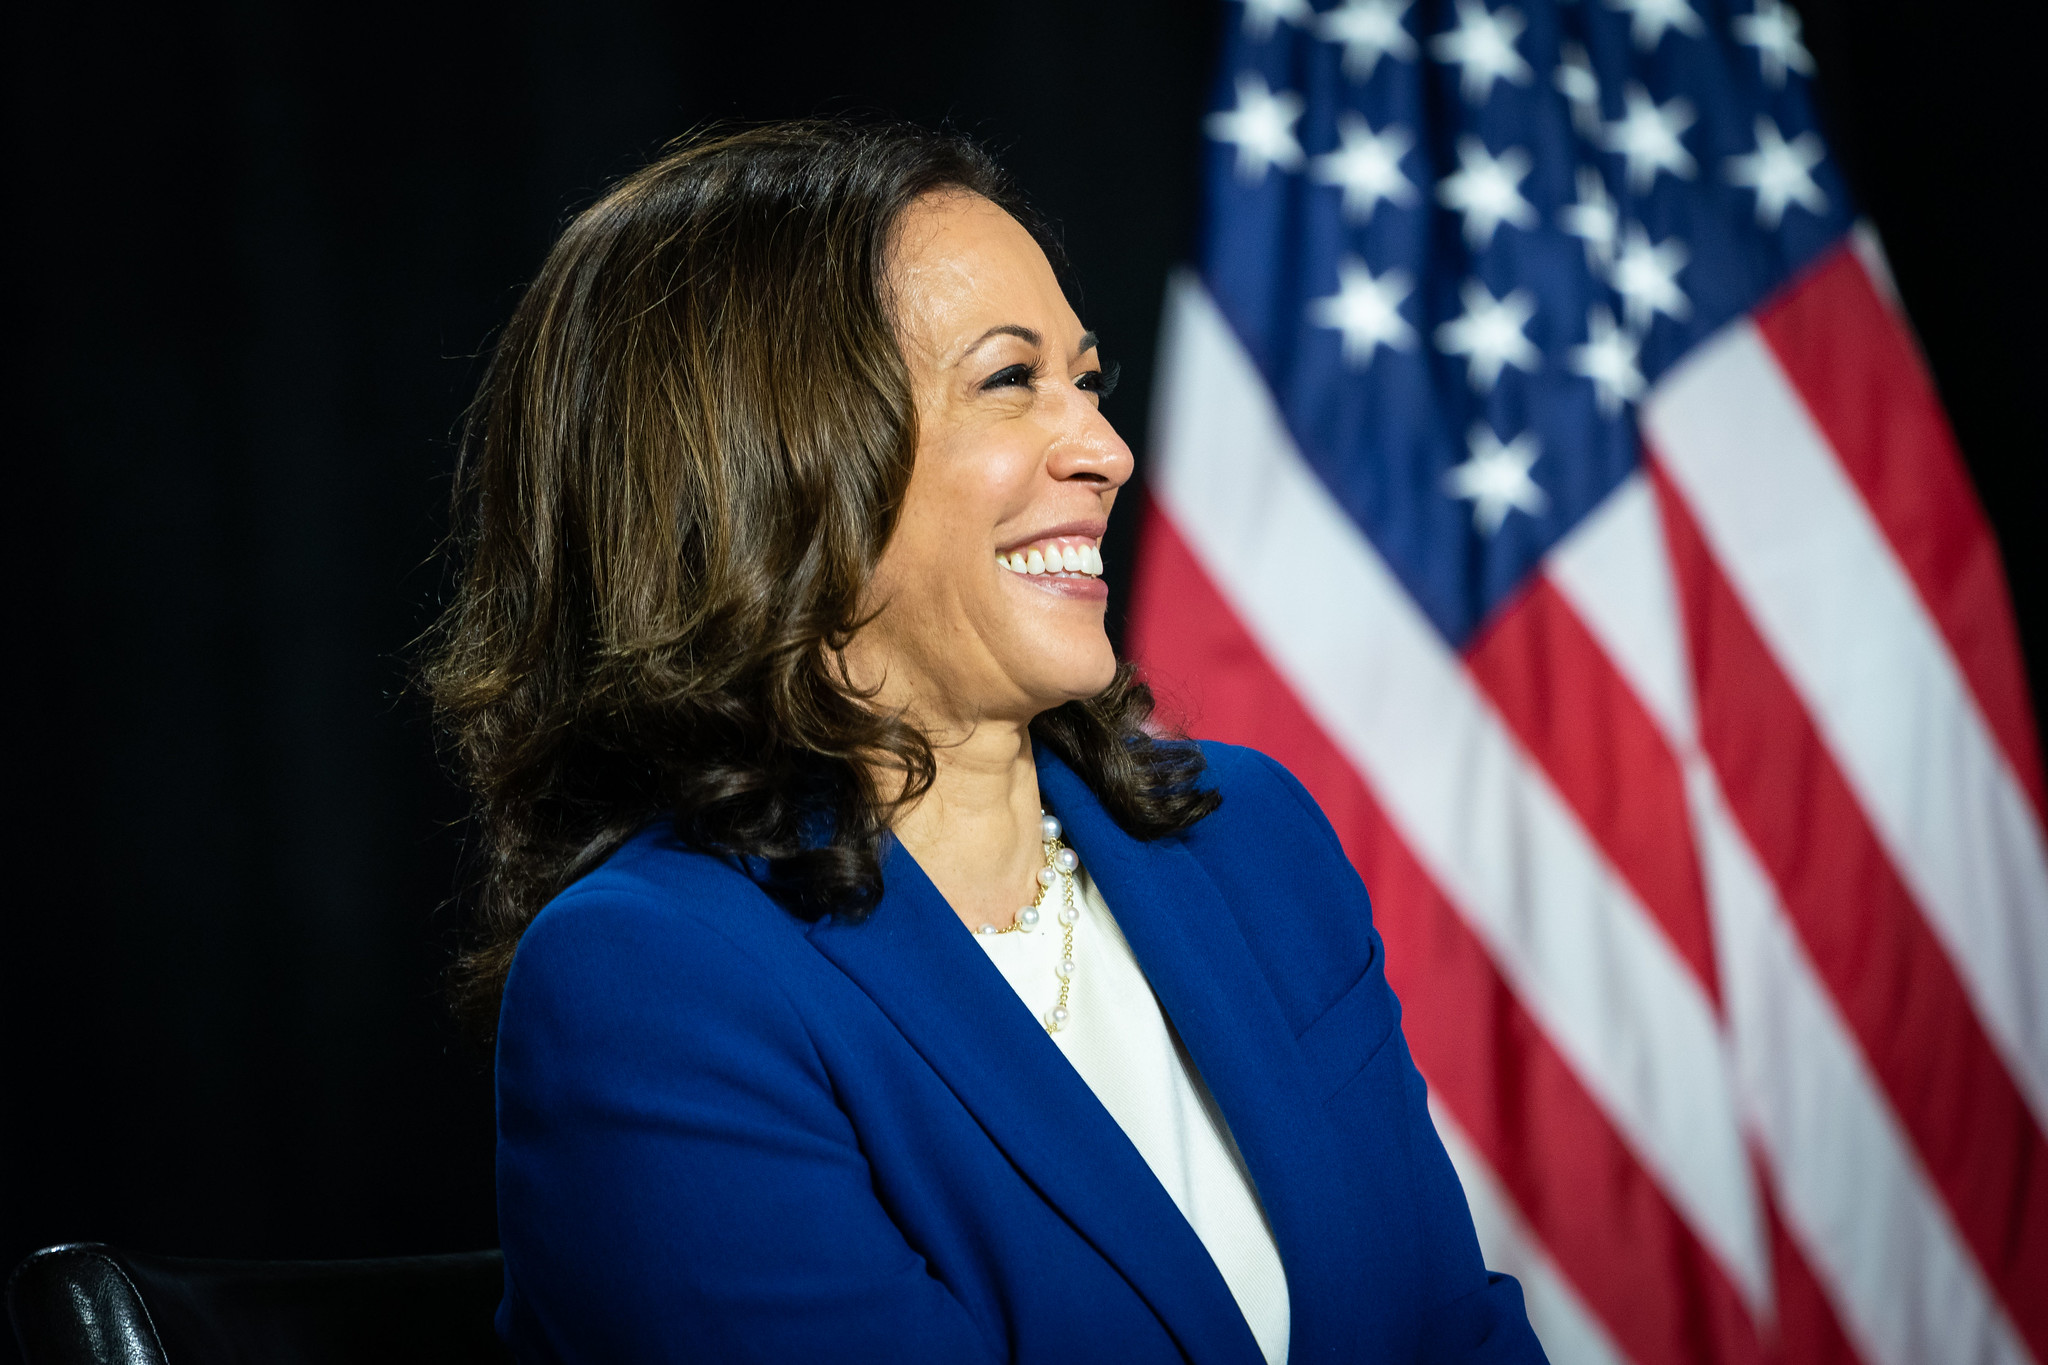 Announcement of Senator Kamala Harris as Candidate for Vice President of the United States - Wilmington, DE - August 12, 2020